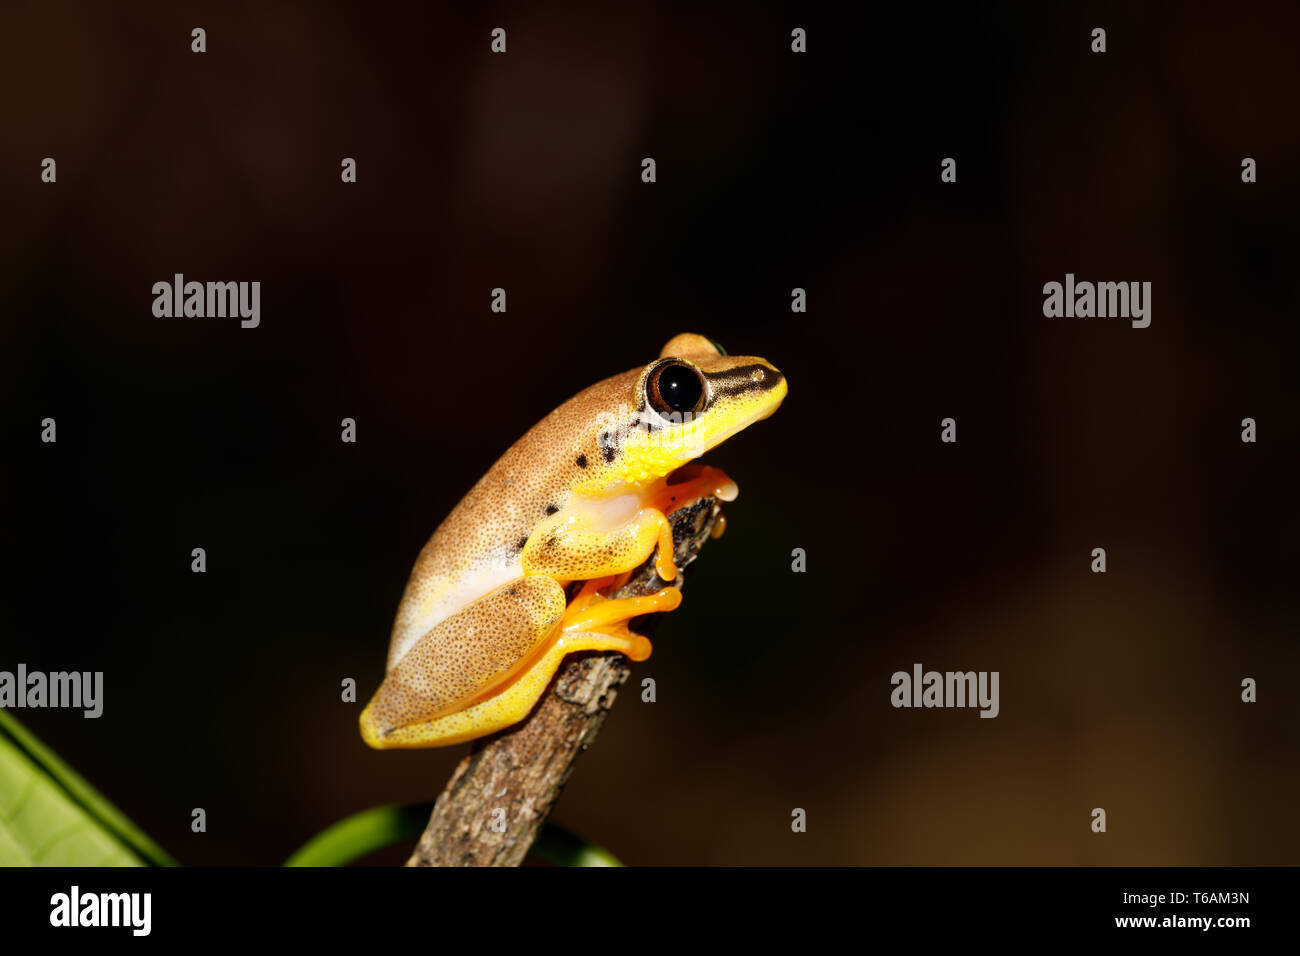 Small yellow tree frog from boophis family, madagascar Stock Photo